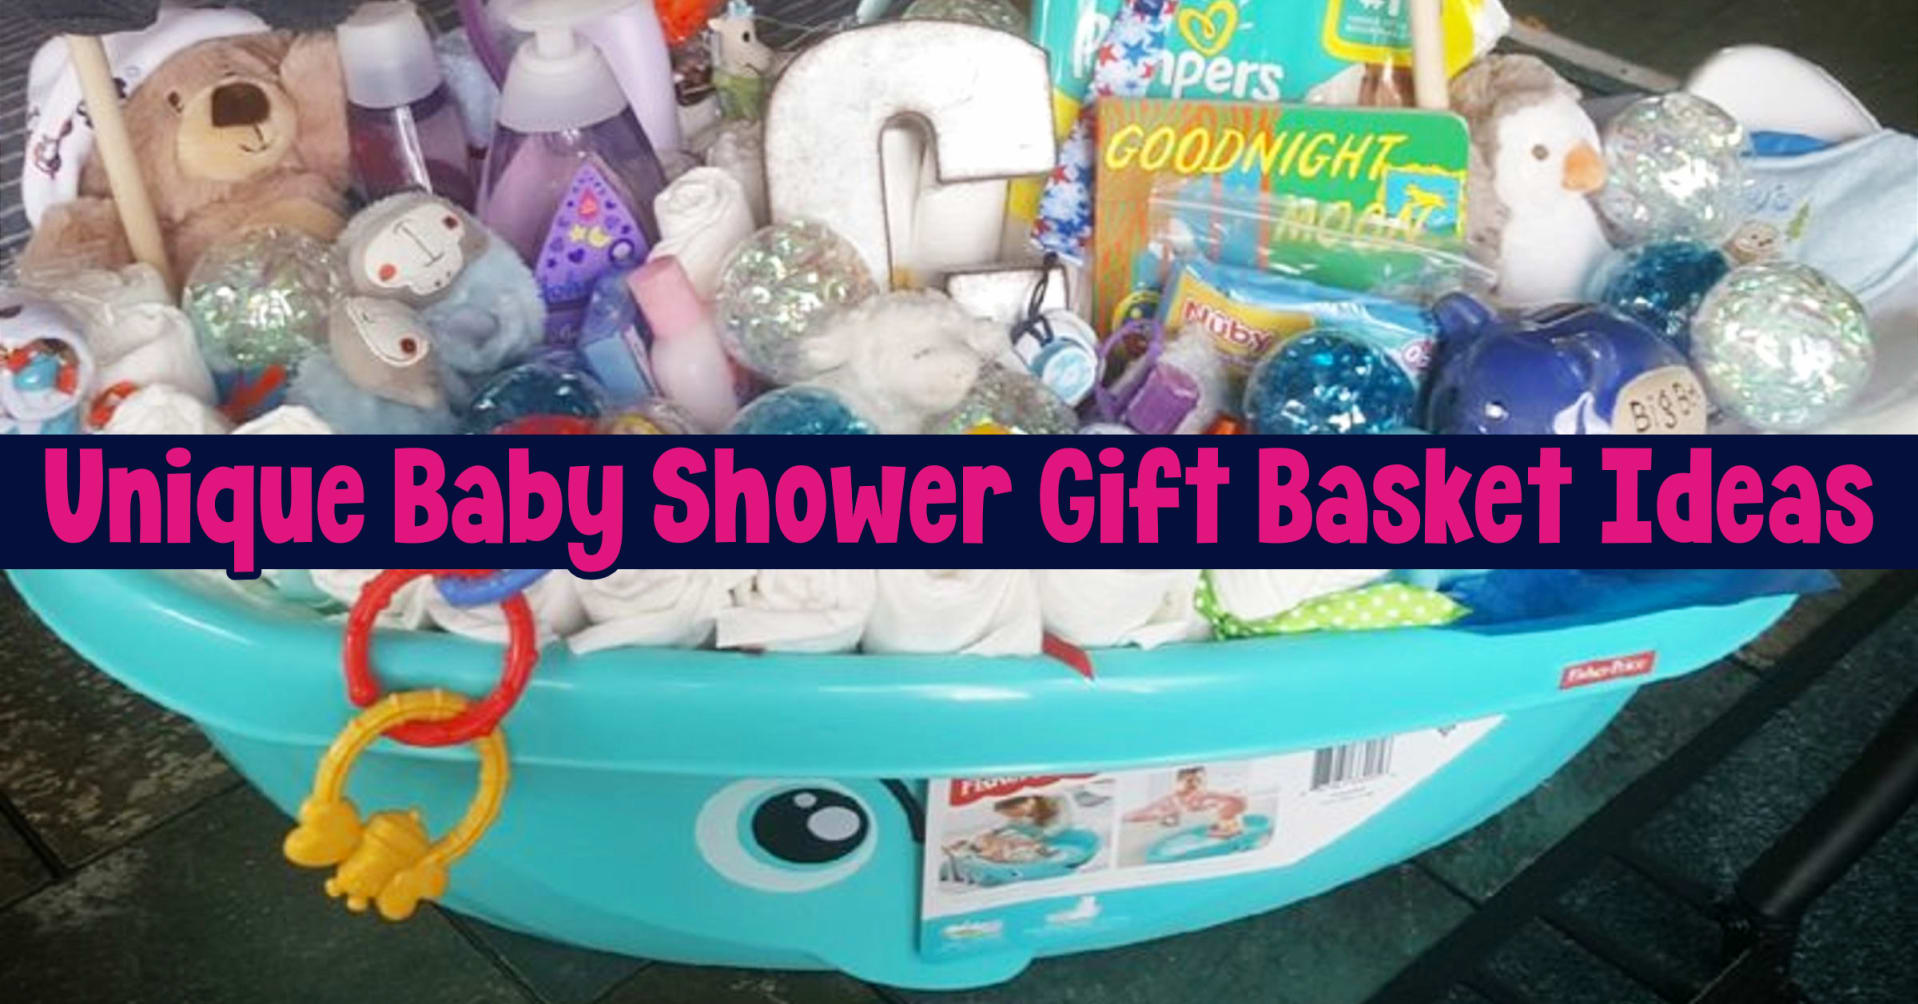 Baby Gift Baskets Ideas - Unique Baby Shower Gifts for Mom To Be   Baby Shower Gift Basket Ideas - Creative DIY Baby Shower Gifts on a Budget - What moms REALLY want for baby shower gifts! Such cute and UNIQUE baby shower basket ideas! Learn how to put together a baby shower gift basket and how to make a baby shower gift basket at home on a budget. These baby shower basket essentials are the best baby shower gift for mom who has everything or the mom to be who NEEDS everything.